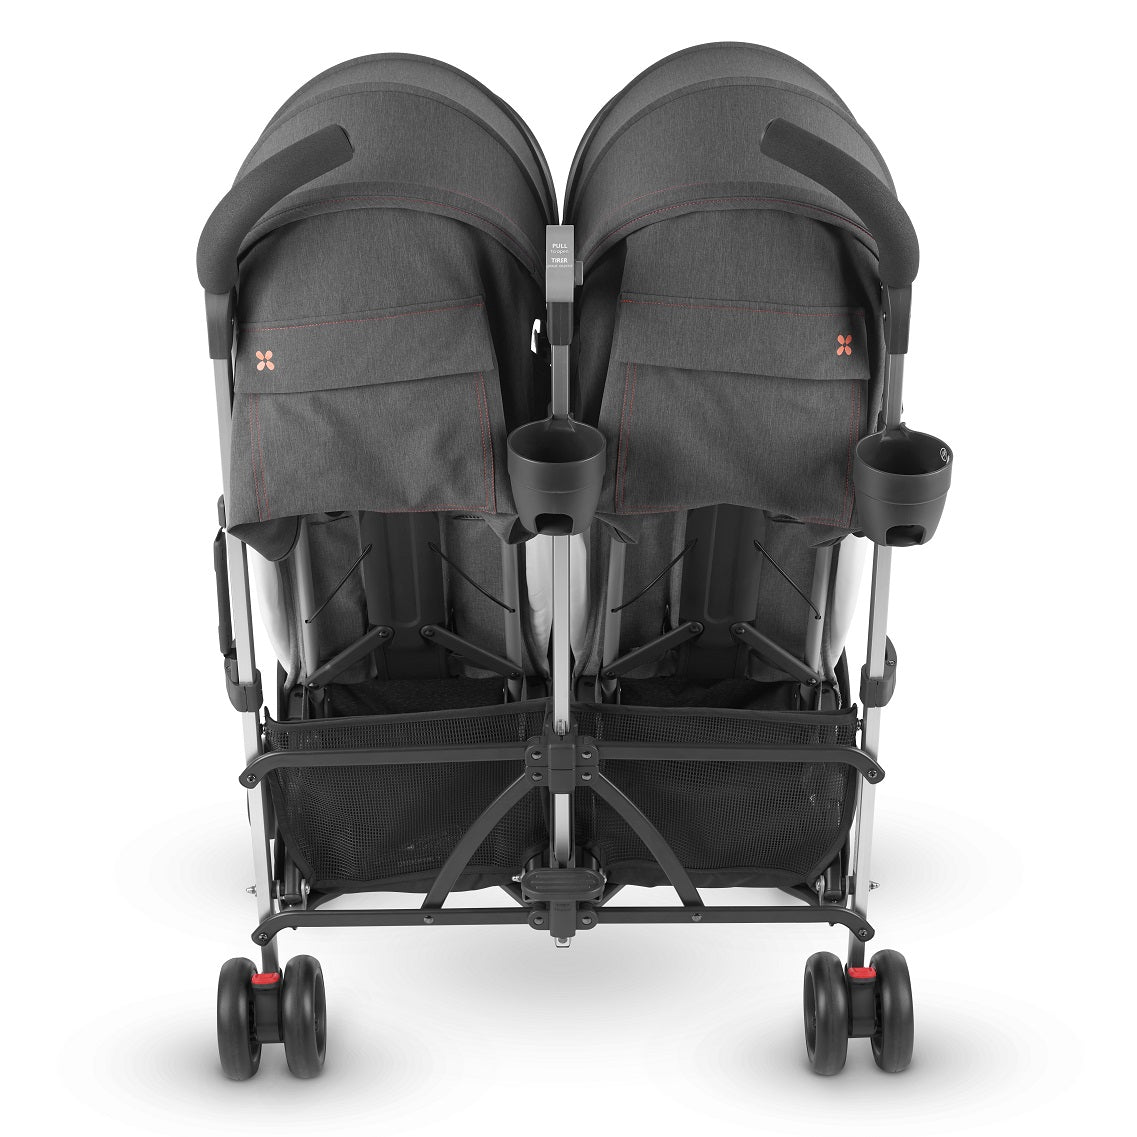 uppababy g luxe replacement wheels